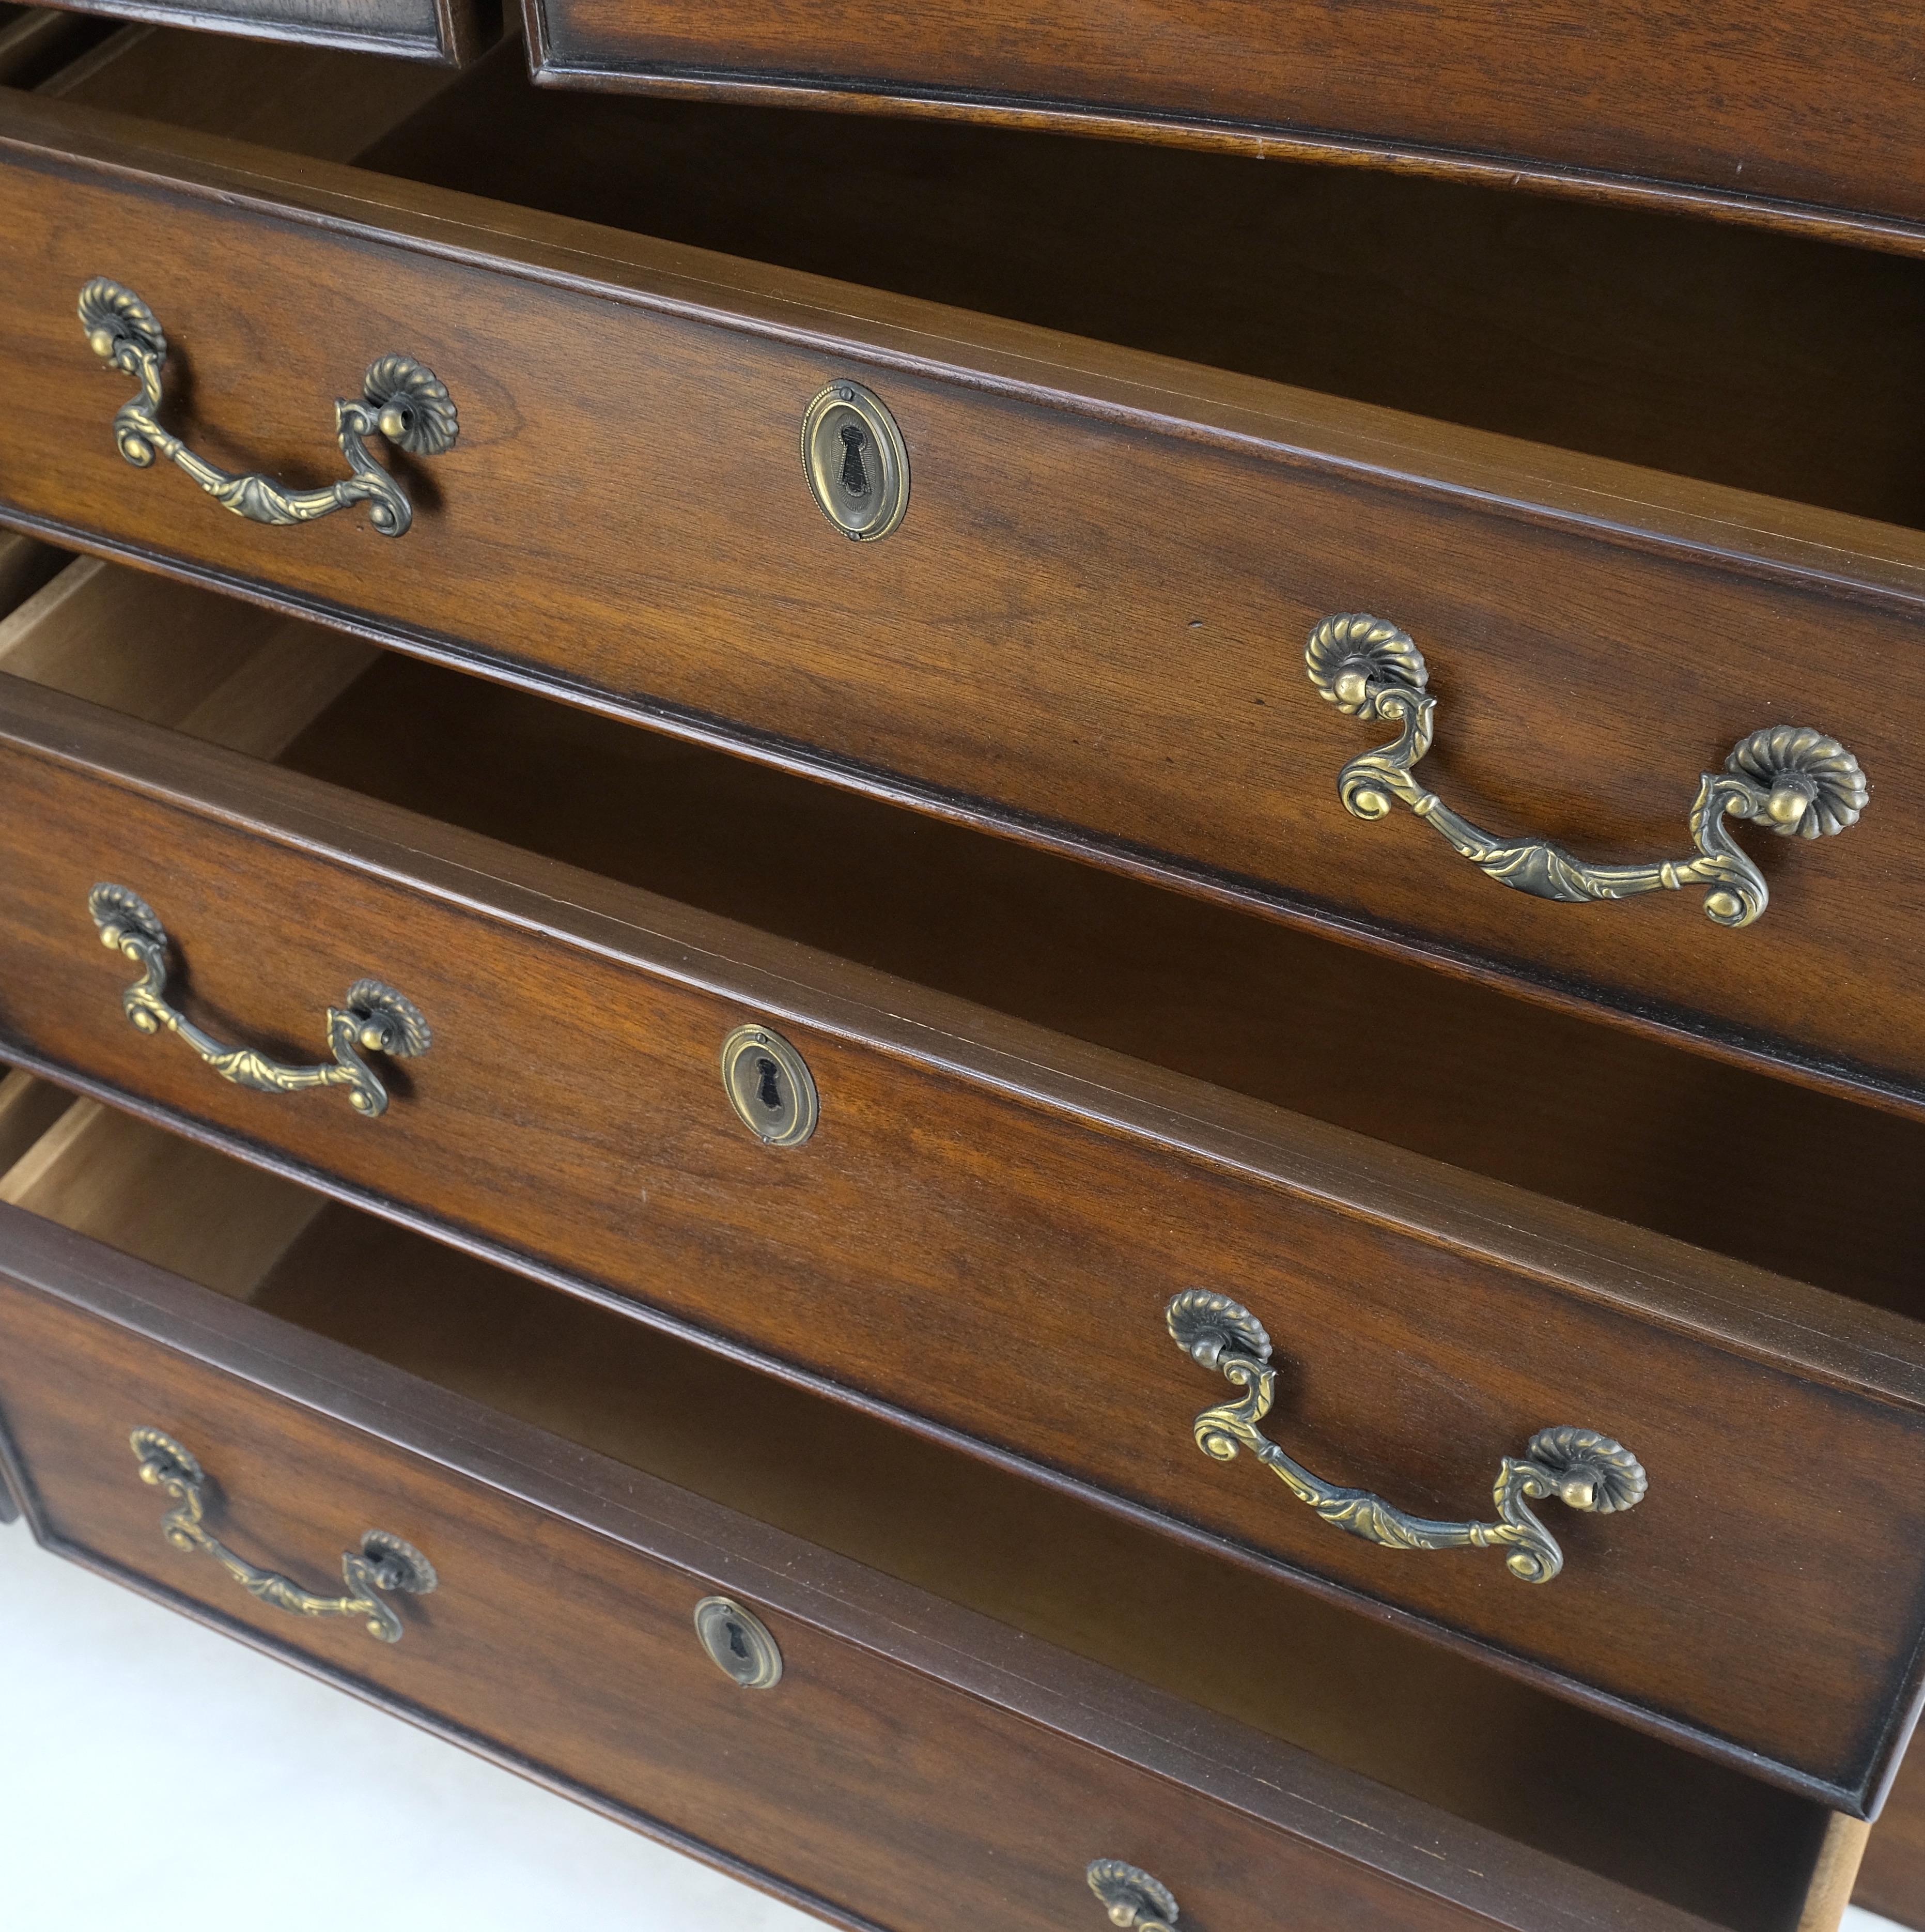 American Banded Top Mahogany Inlayed Bracket Feet 11 Drawers Dresser Credenza MINT! For Sale